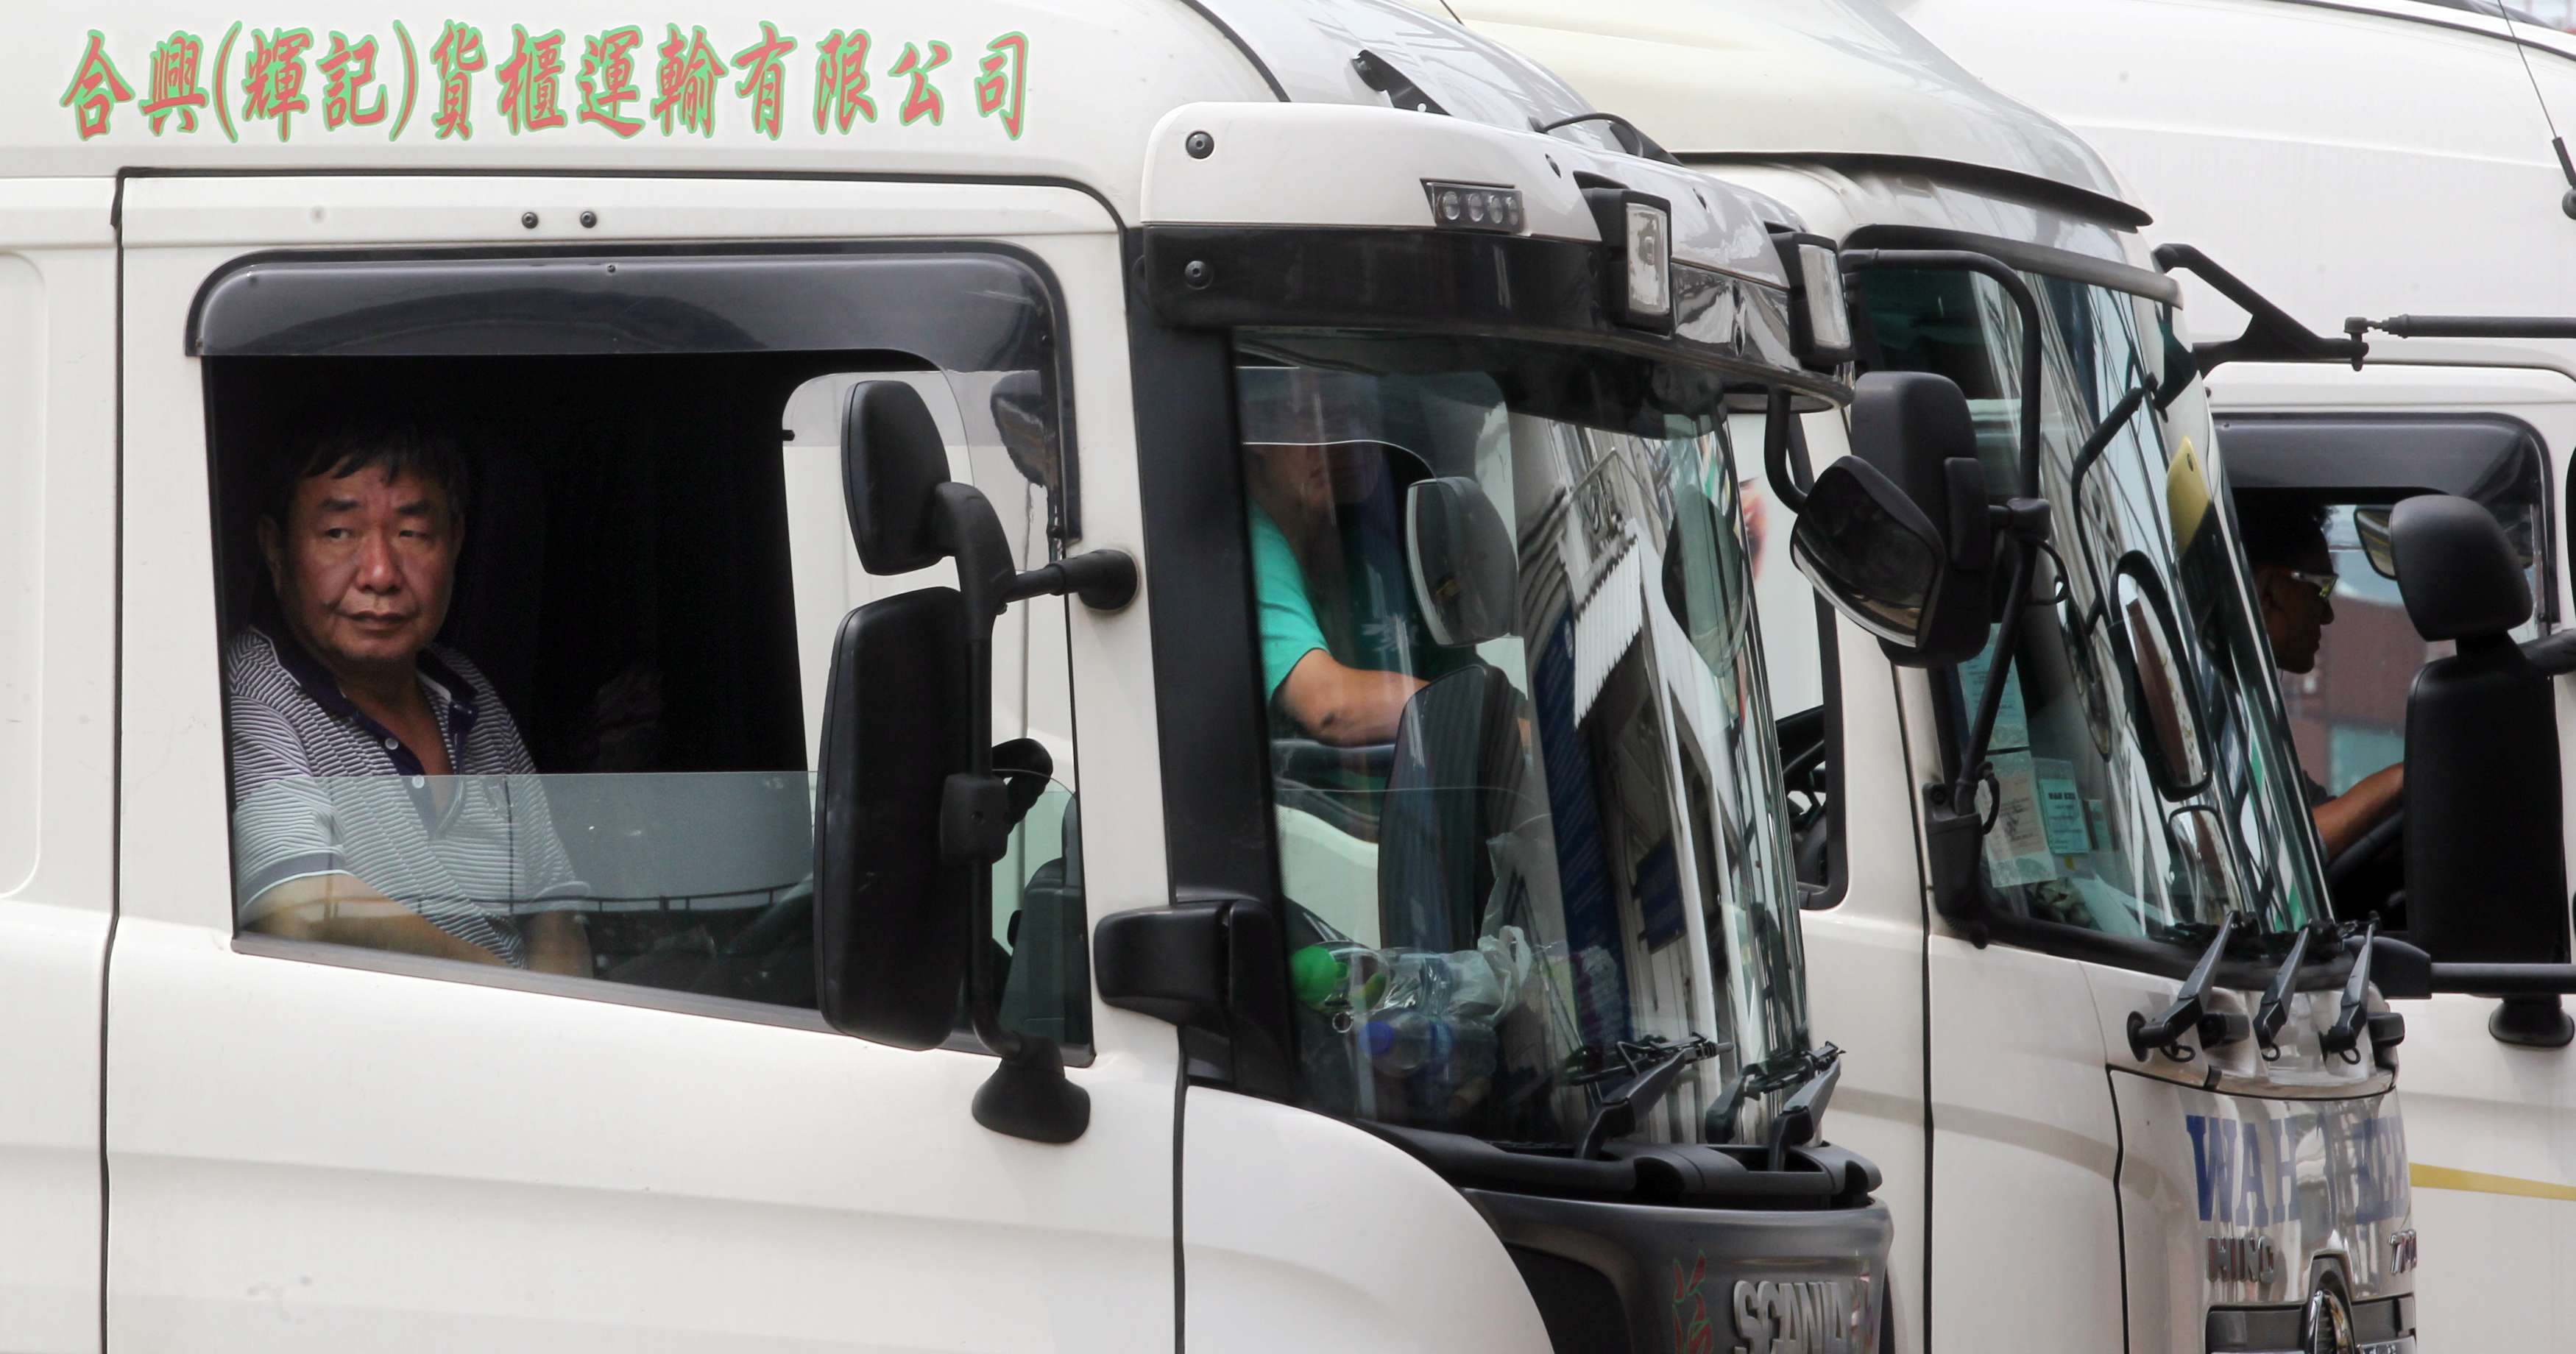 With machines and automation threatening the livelihoods of many workers, such as truck drivers, many countries are now looking to a universal basic income system to boost their economies. Photo: K. Y. Cheng